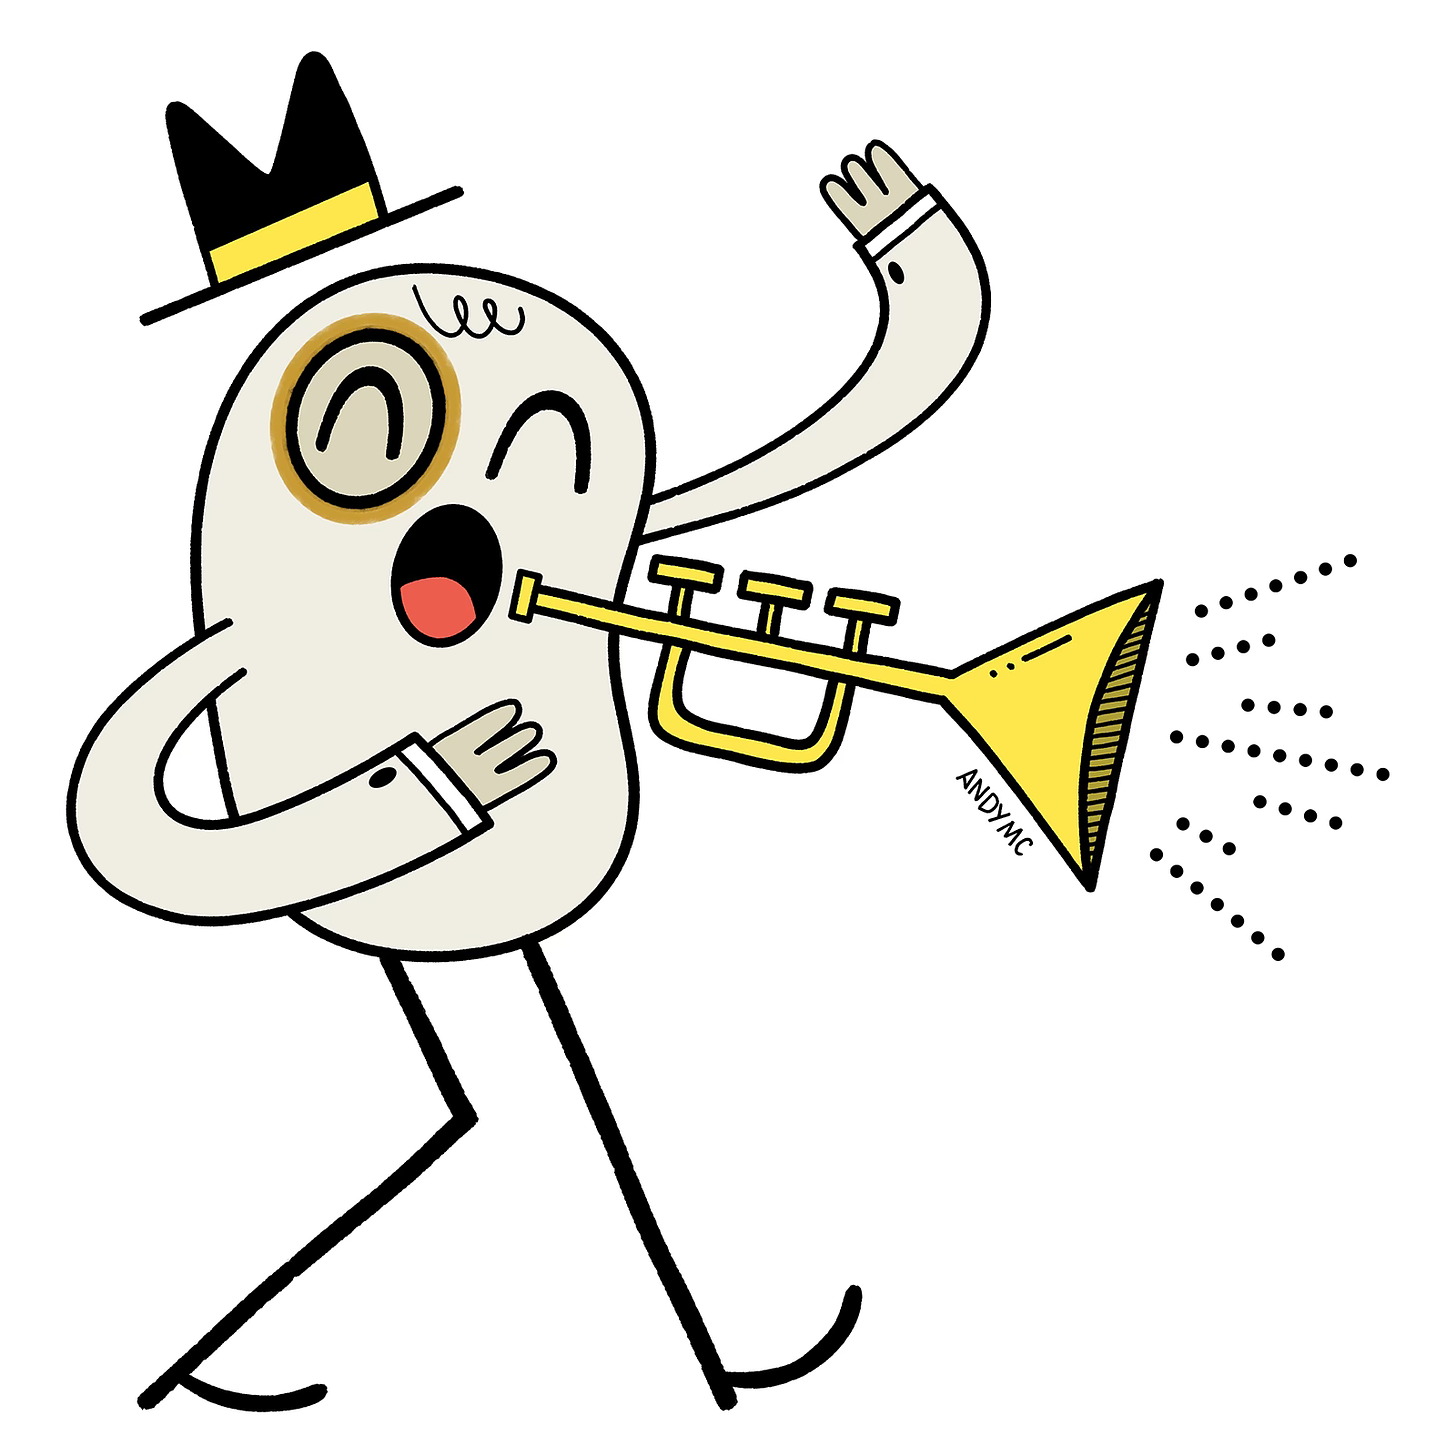 An illustration of a black-eyed pea playing a trumpet.